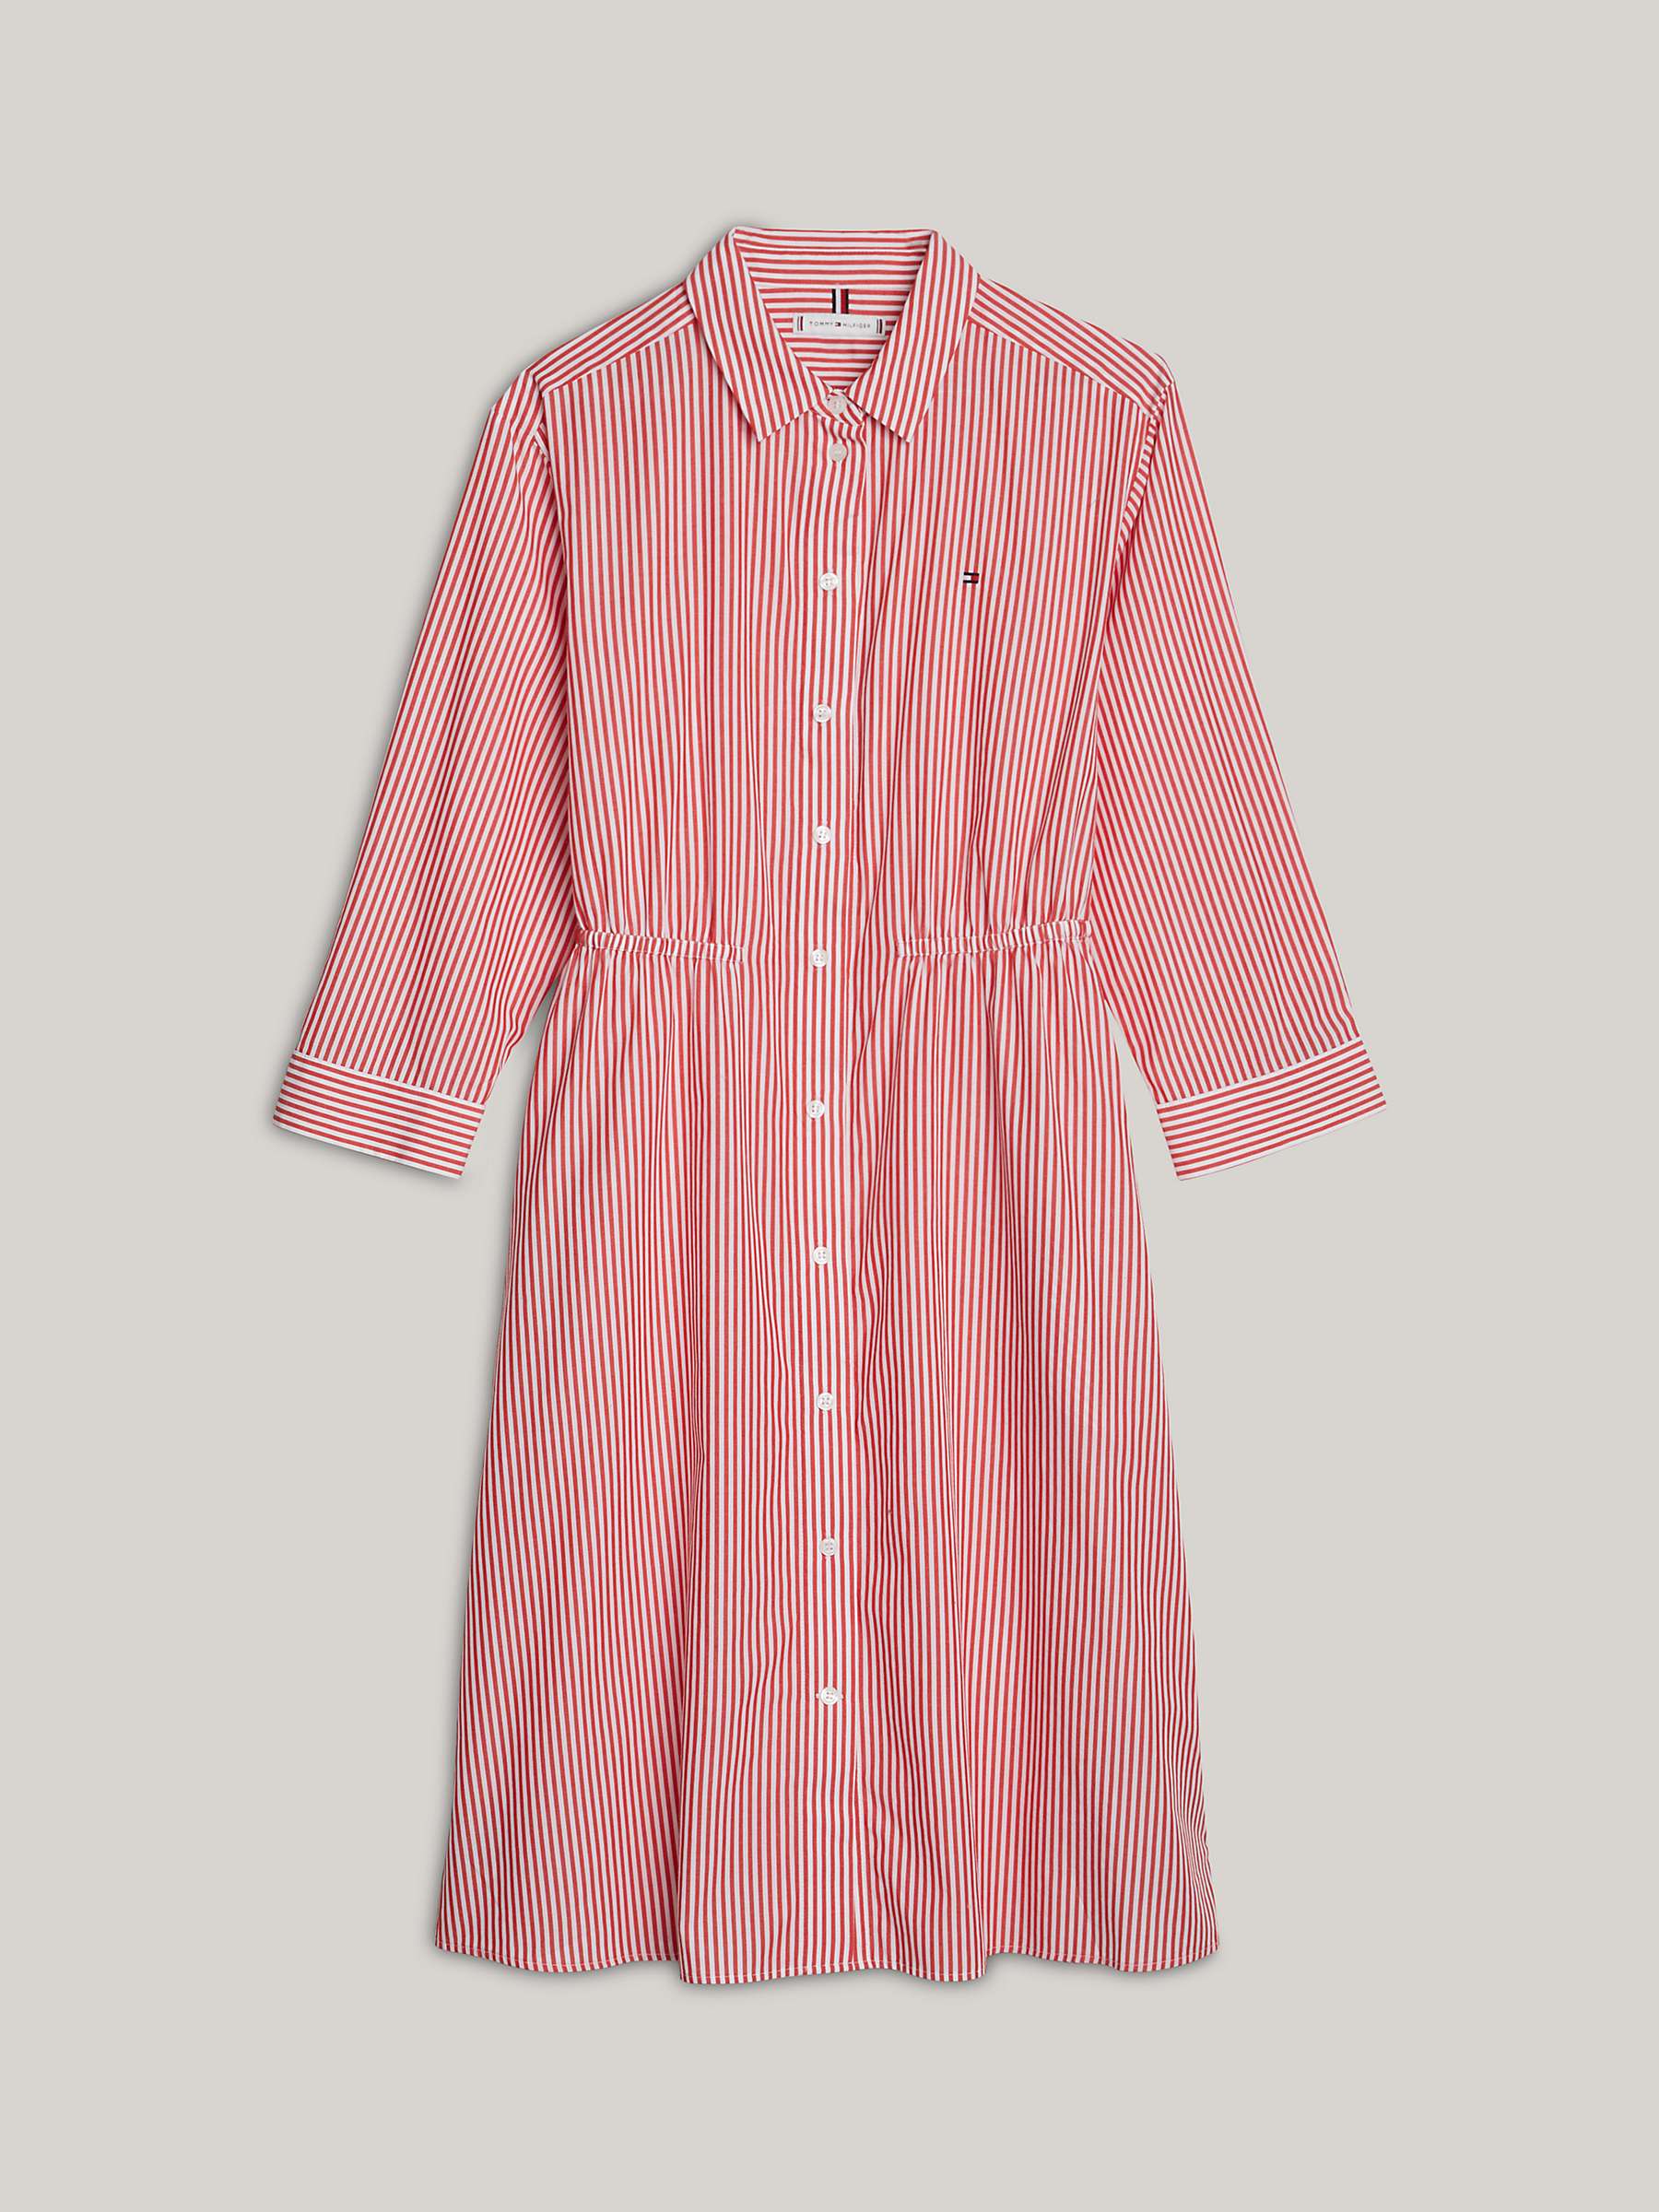 Buy Tommy Hilfiger Adaptive Striped Cotton Shirt Dress, Red/White Online at johnlewis.com